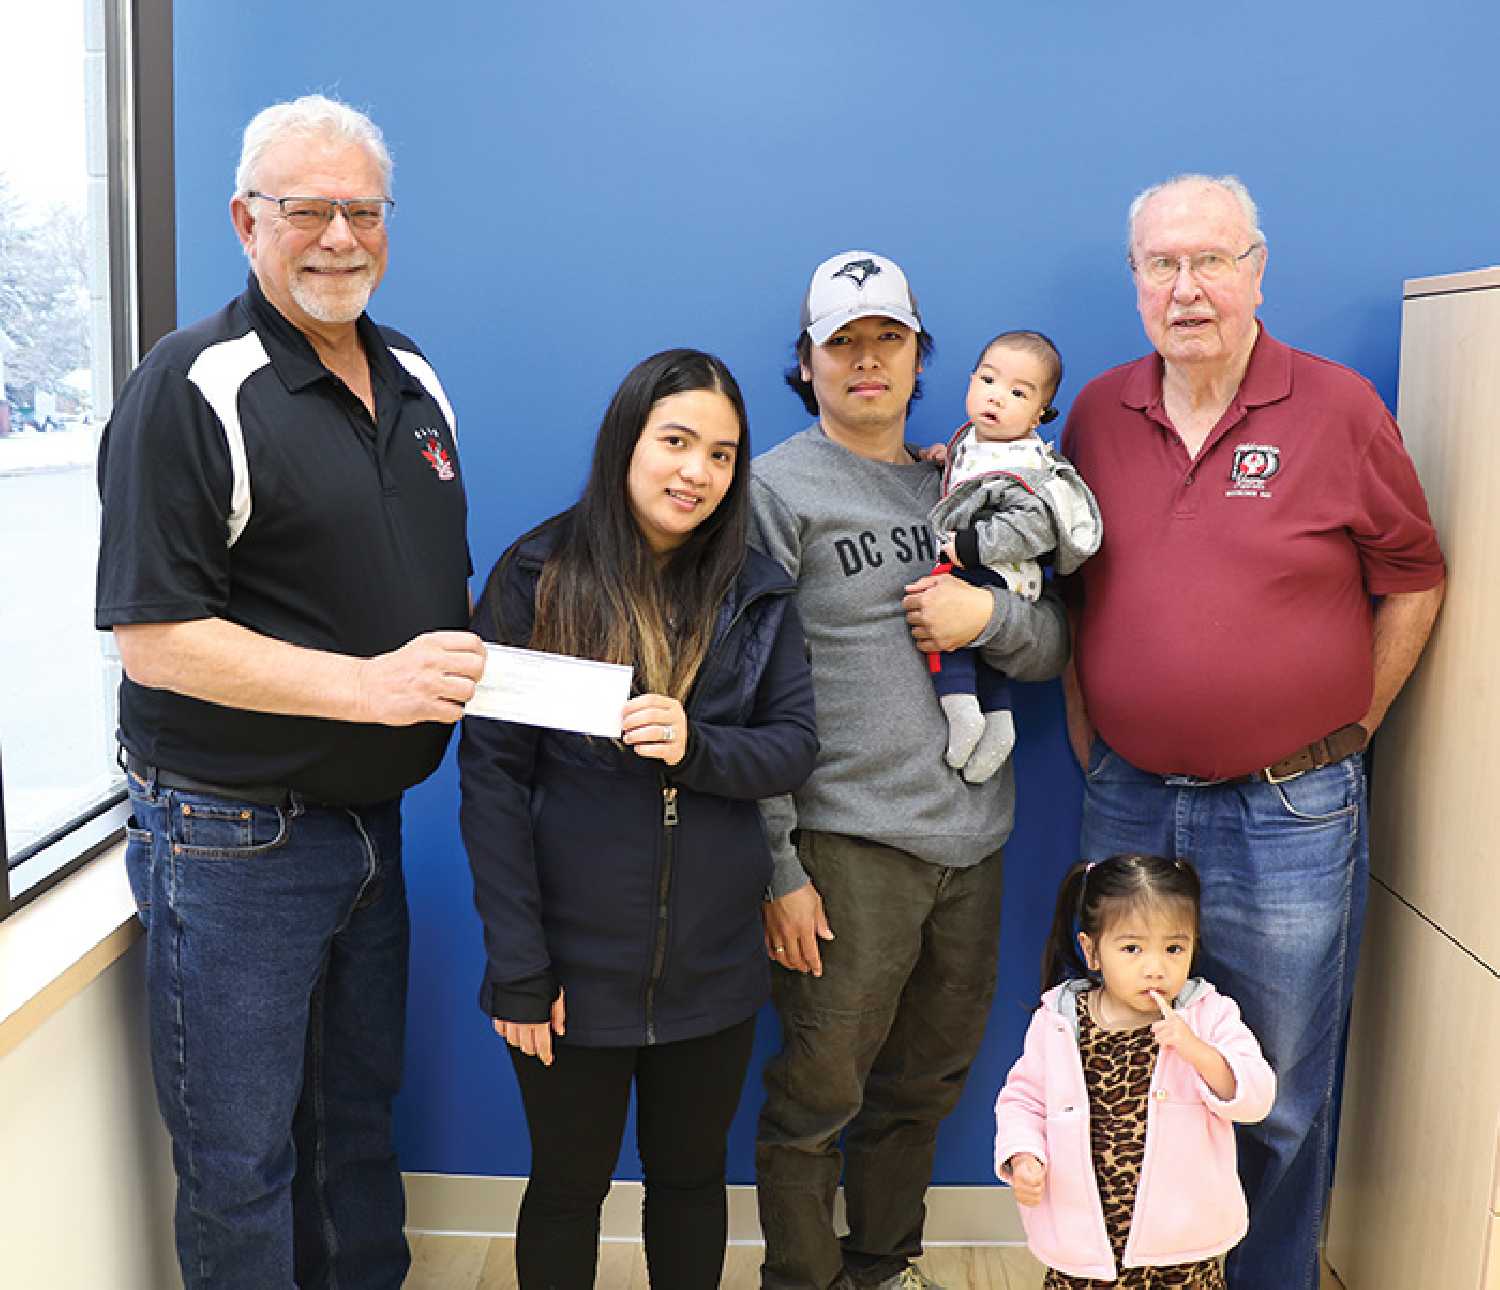 Moosomin Elks donate $4,000 to the Visperas family to help cover their travel expenses going to Regina, as they go see a doctor in help treat their sons medical condition of microtia. Left: Ron Potter of  Moosomin Elks, Danica and Armisto Jr. Visperas, their son  Armisto III, Primrose and (right) Mel Durant of Moosomin Elks.